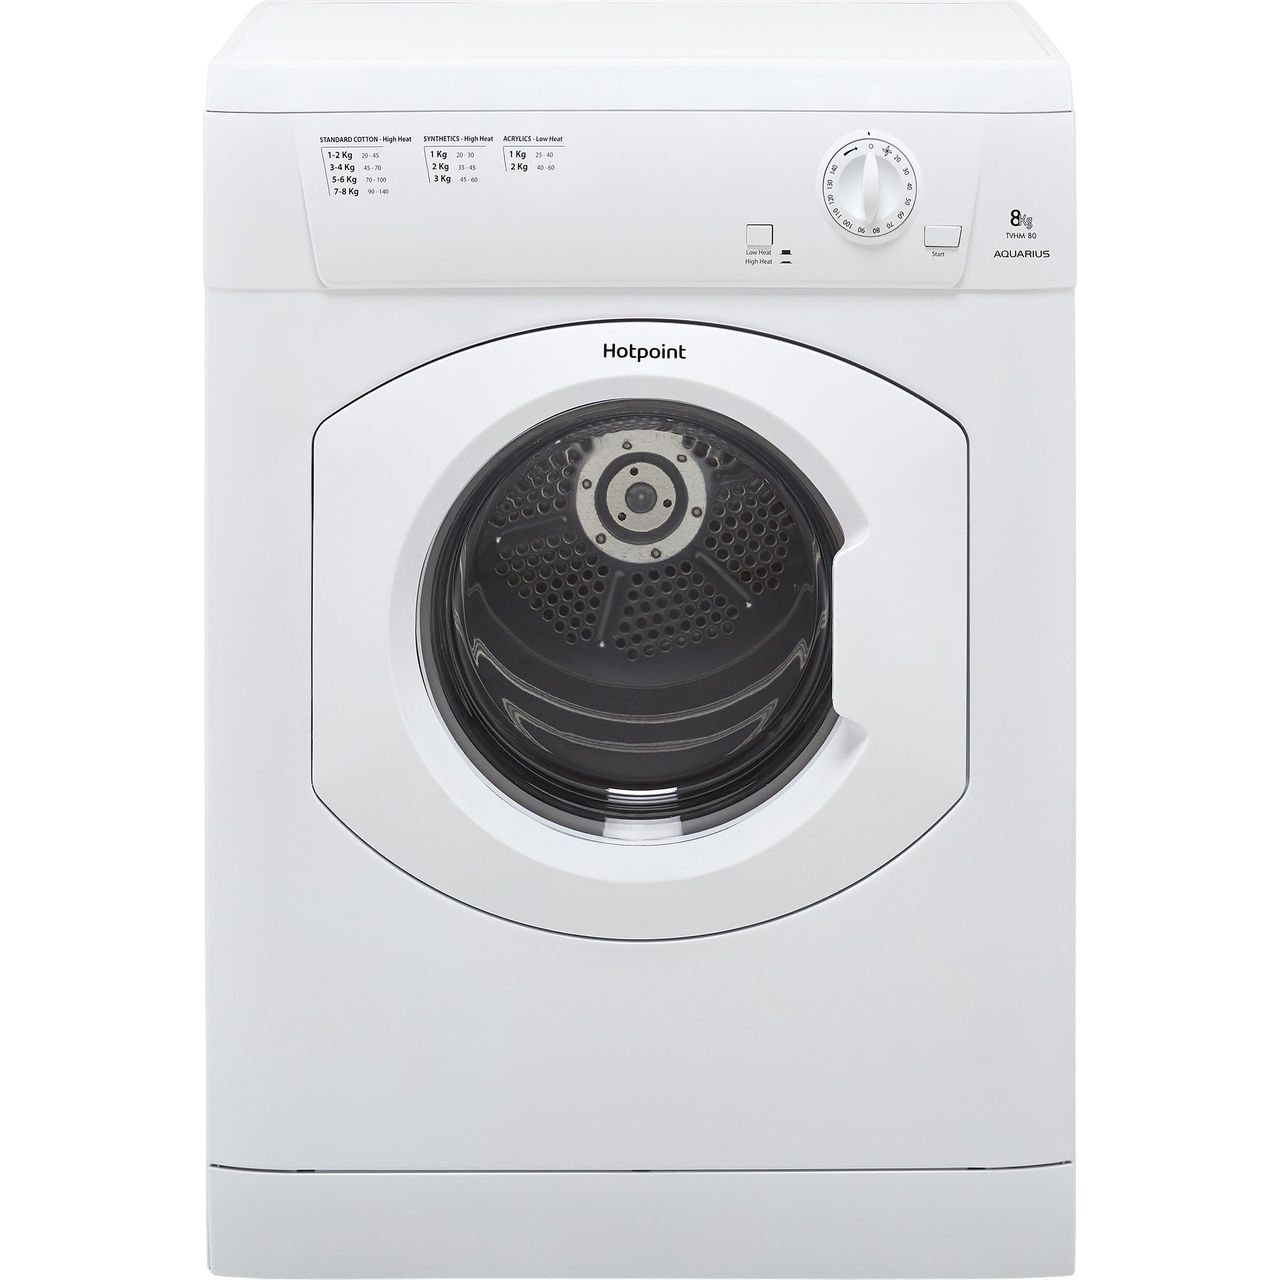 Hotpoint TVHM80CP Tumble Dryer Not drying properly